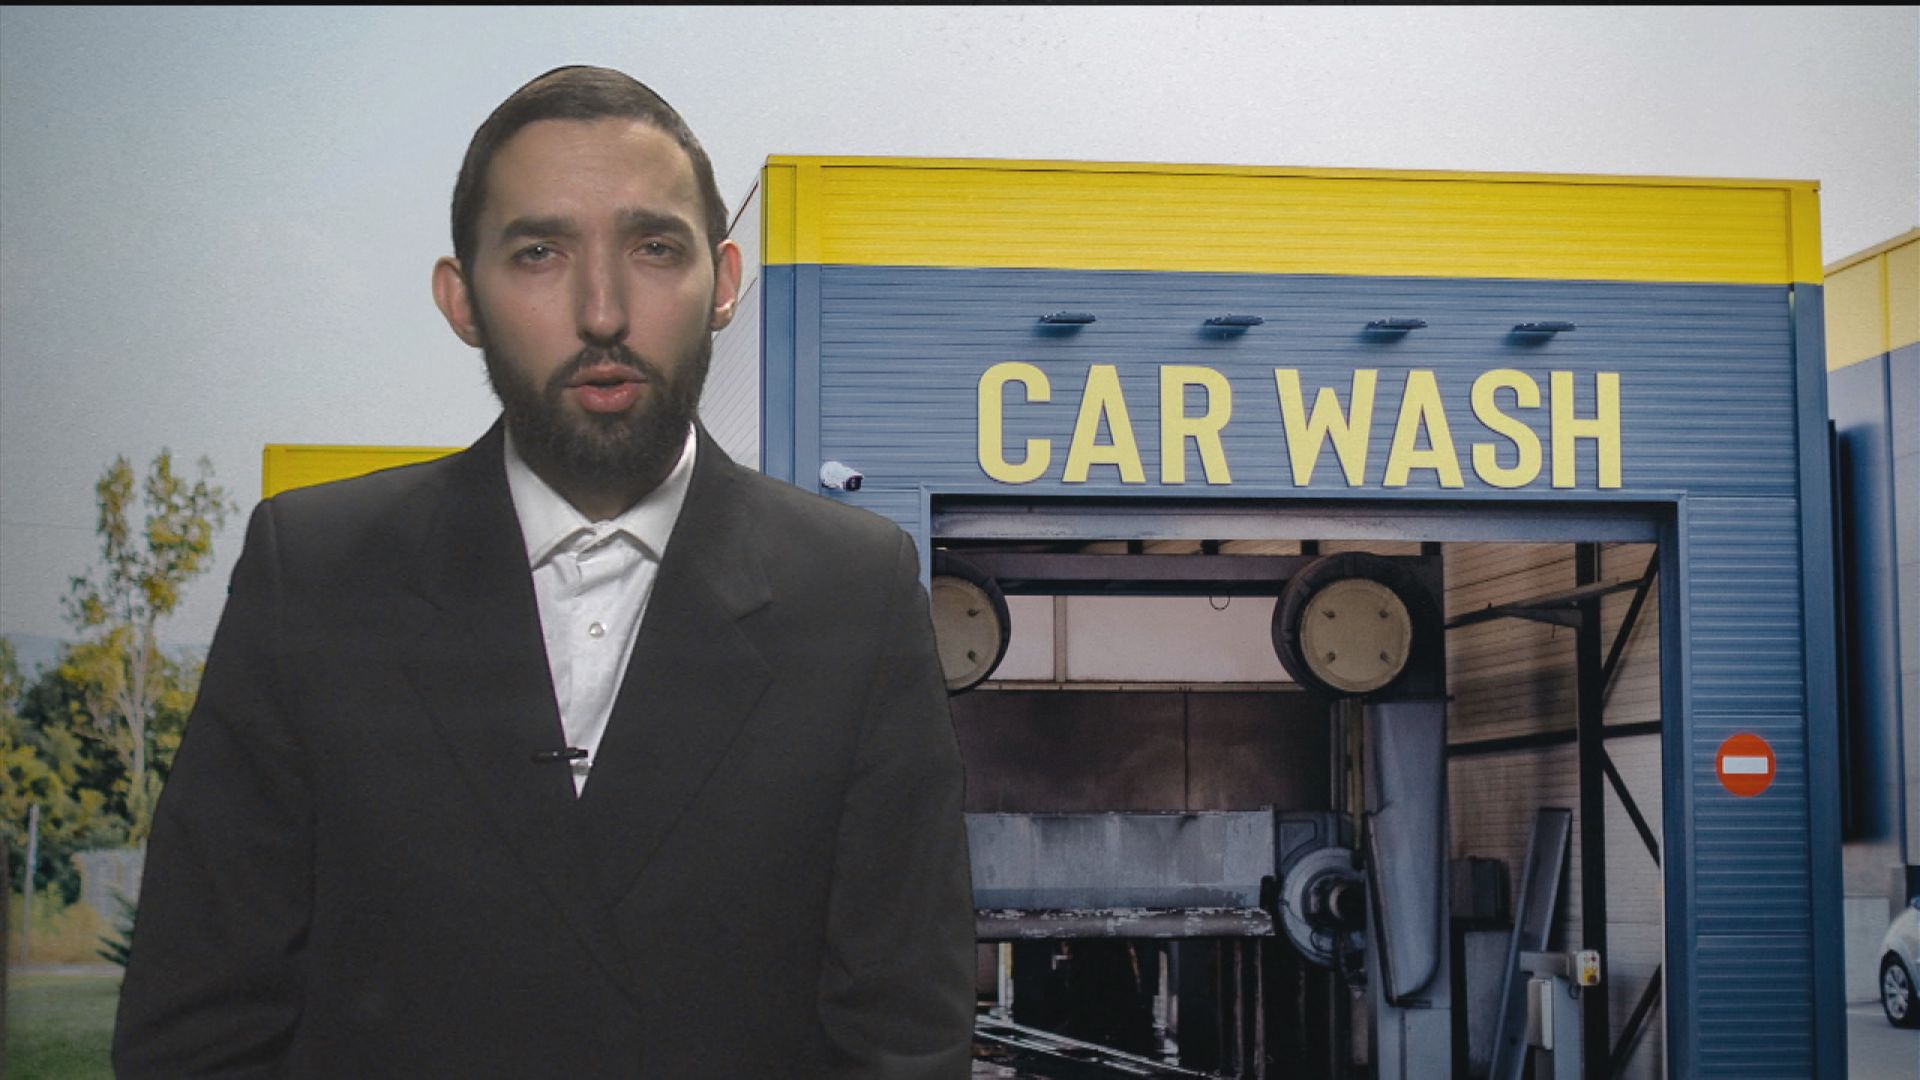 Eichenstein Speaks Out on Discriminatory Pricing Practices at Local Car Washes